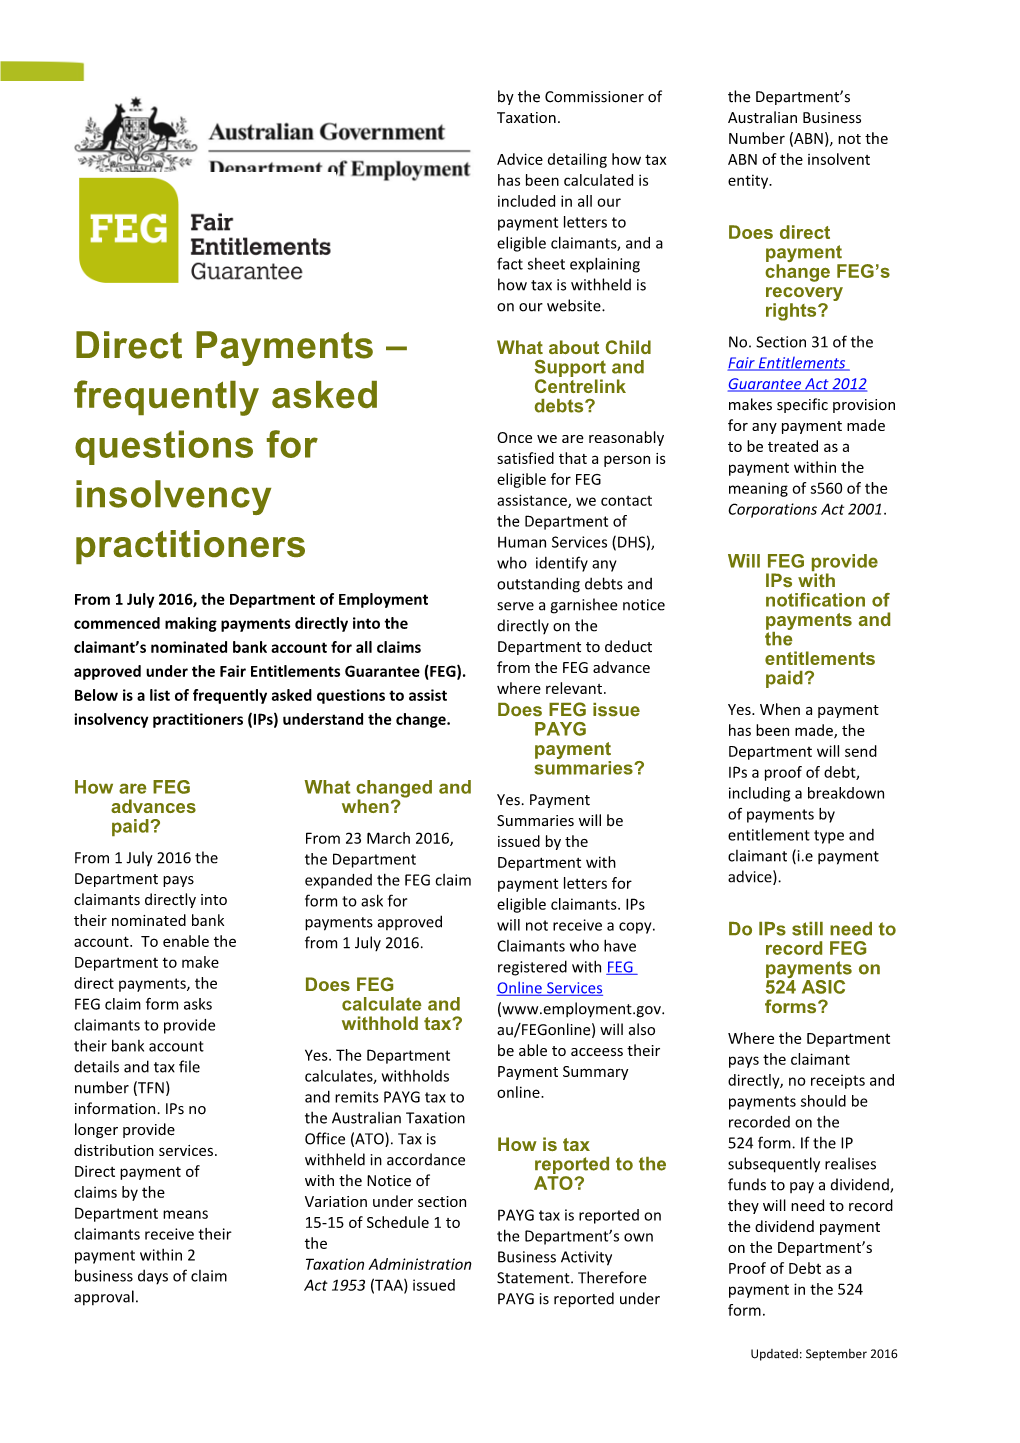 Direct Payments Frequently Asked Questions for Insolvency Practitioners